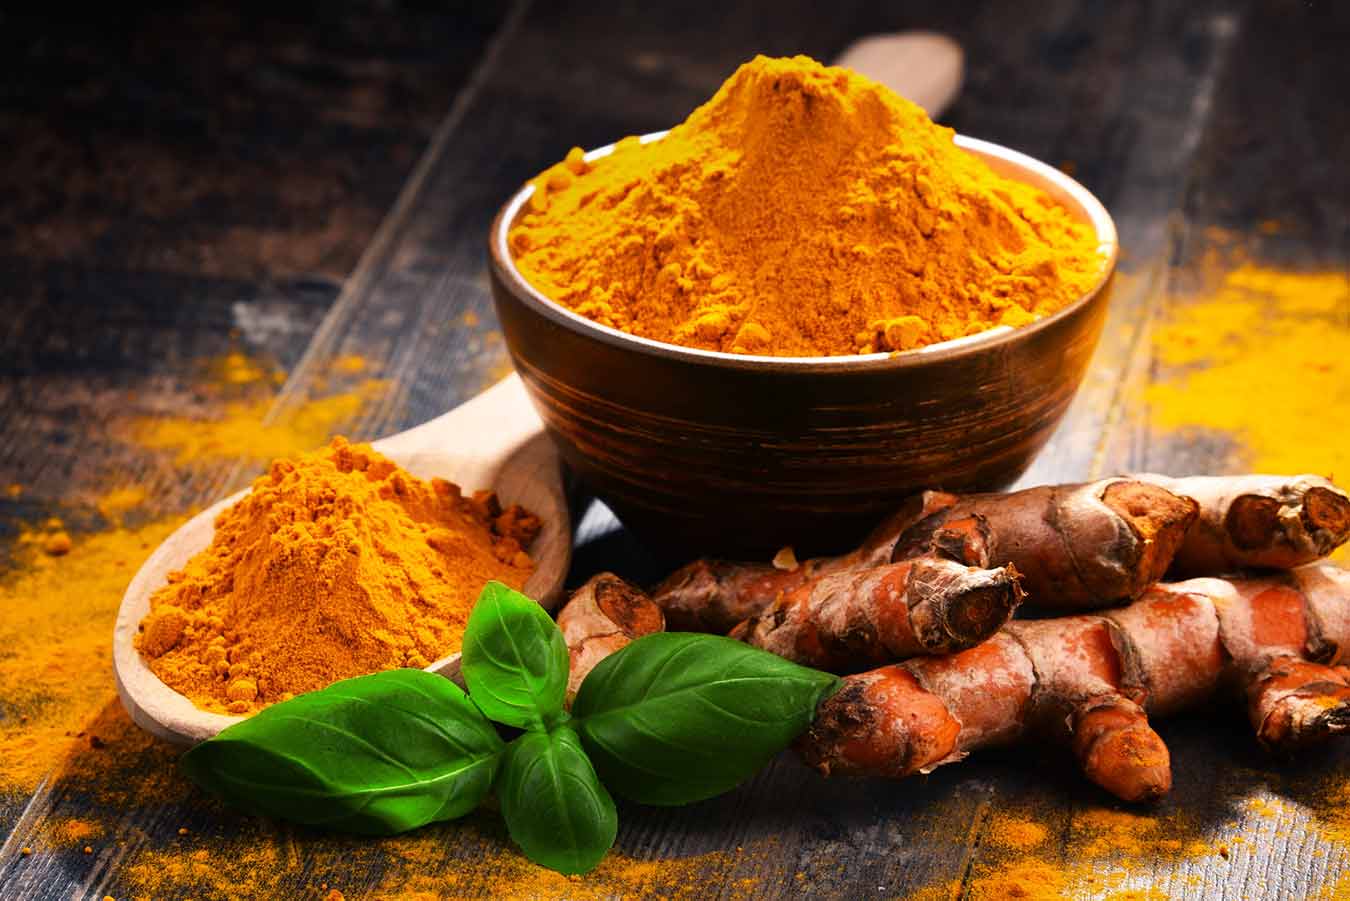 Get Back To The Roots With These 7 Health Benefits Of Turmeric (Haldi)